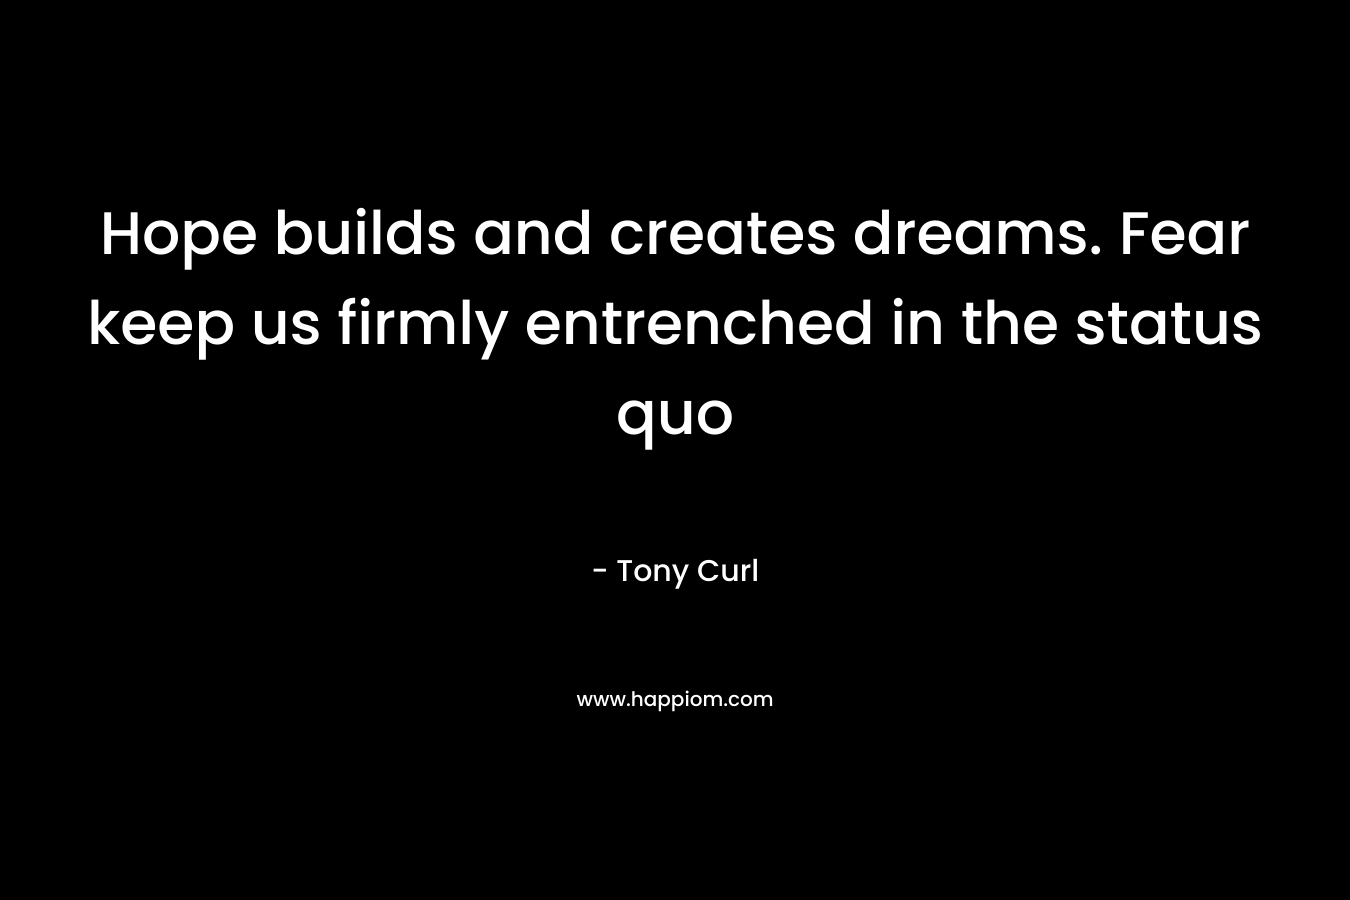 Hope builds and creates dreams. Fear keep us firmly entrenched in the status quo